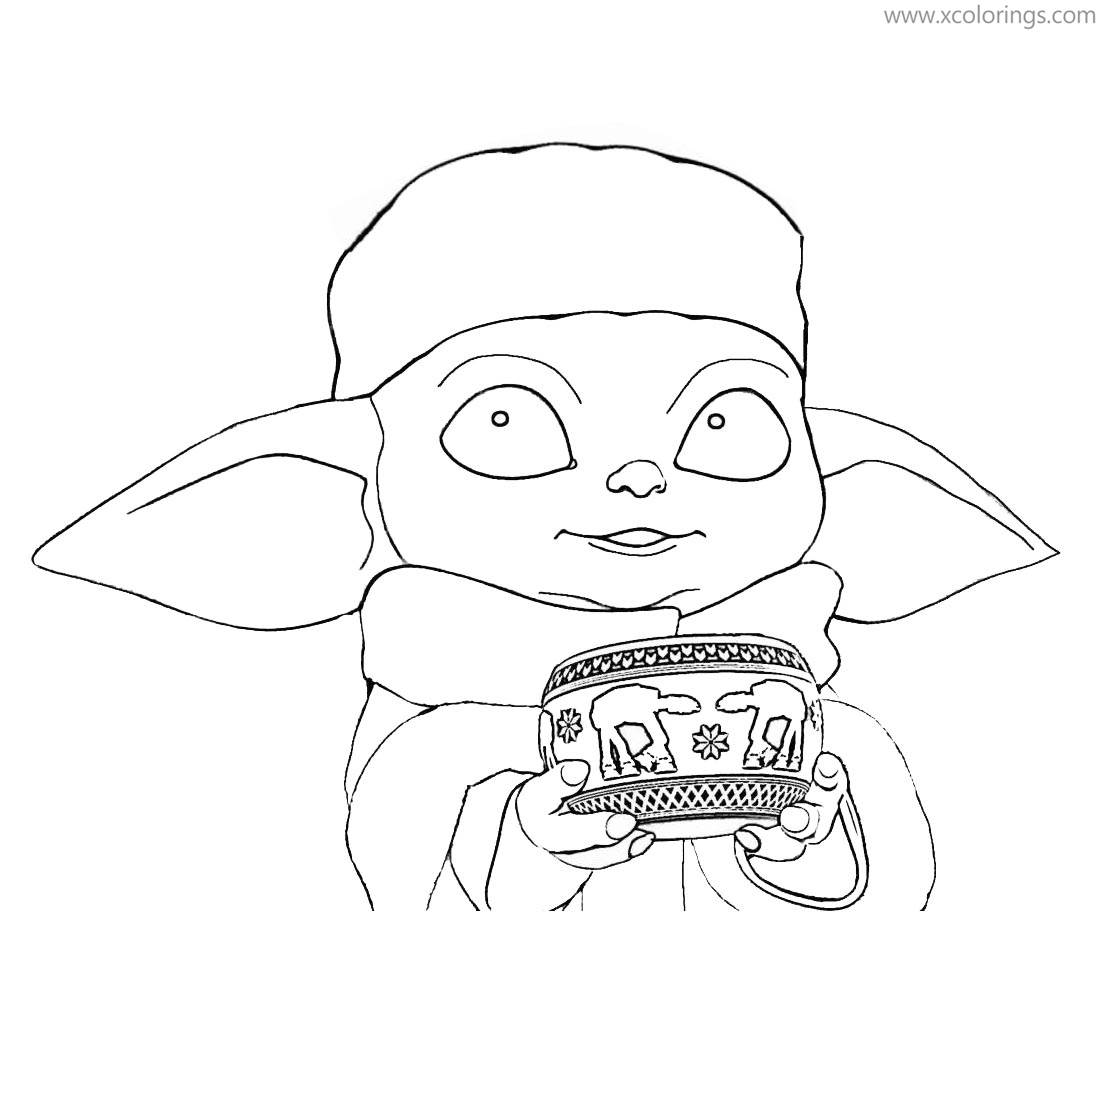 Free Baby Yoda Coloring Pages Yoda with A Bowl printable